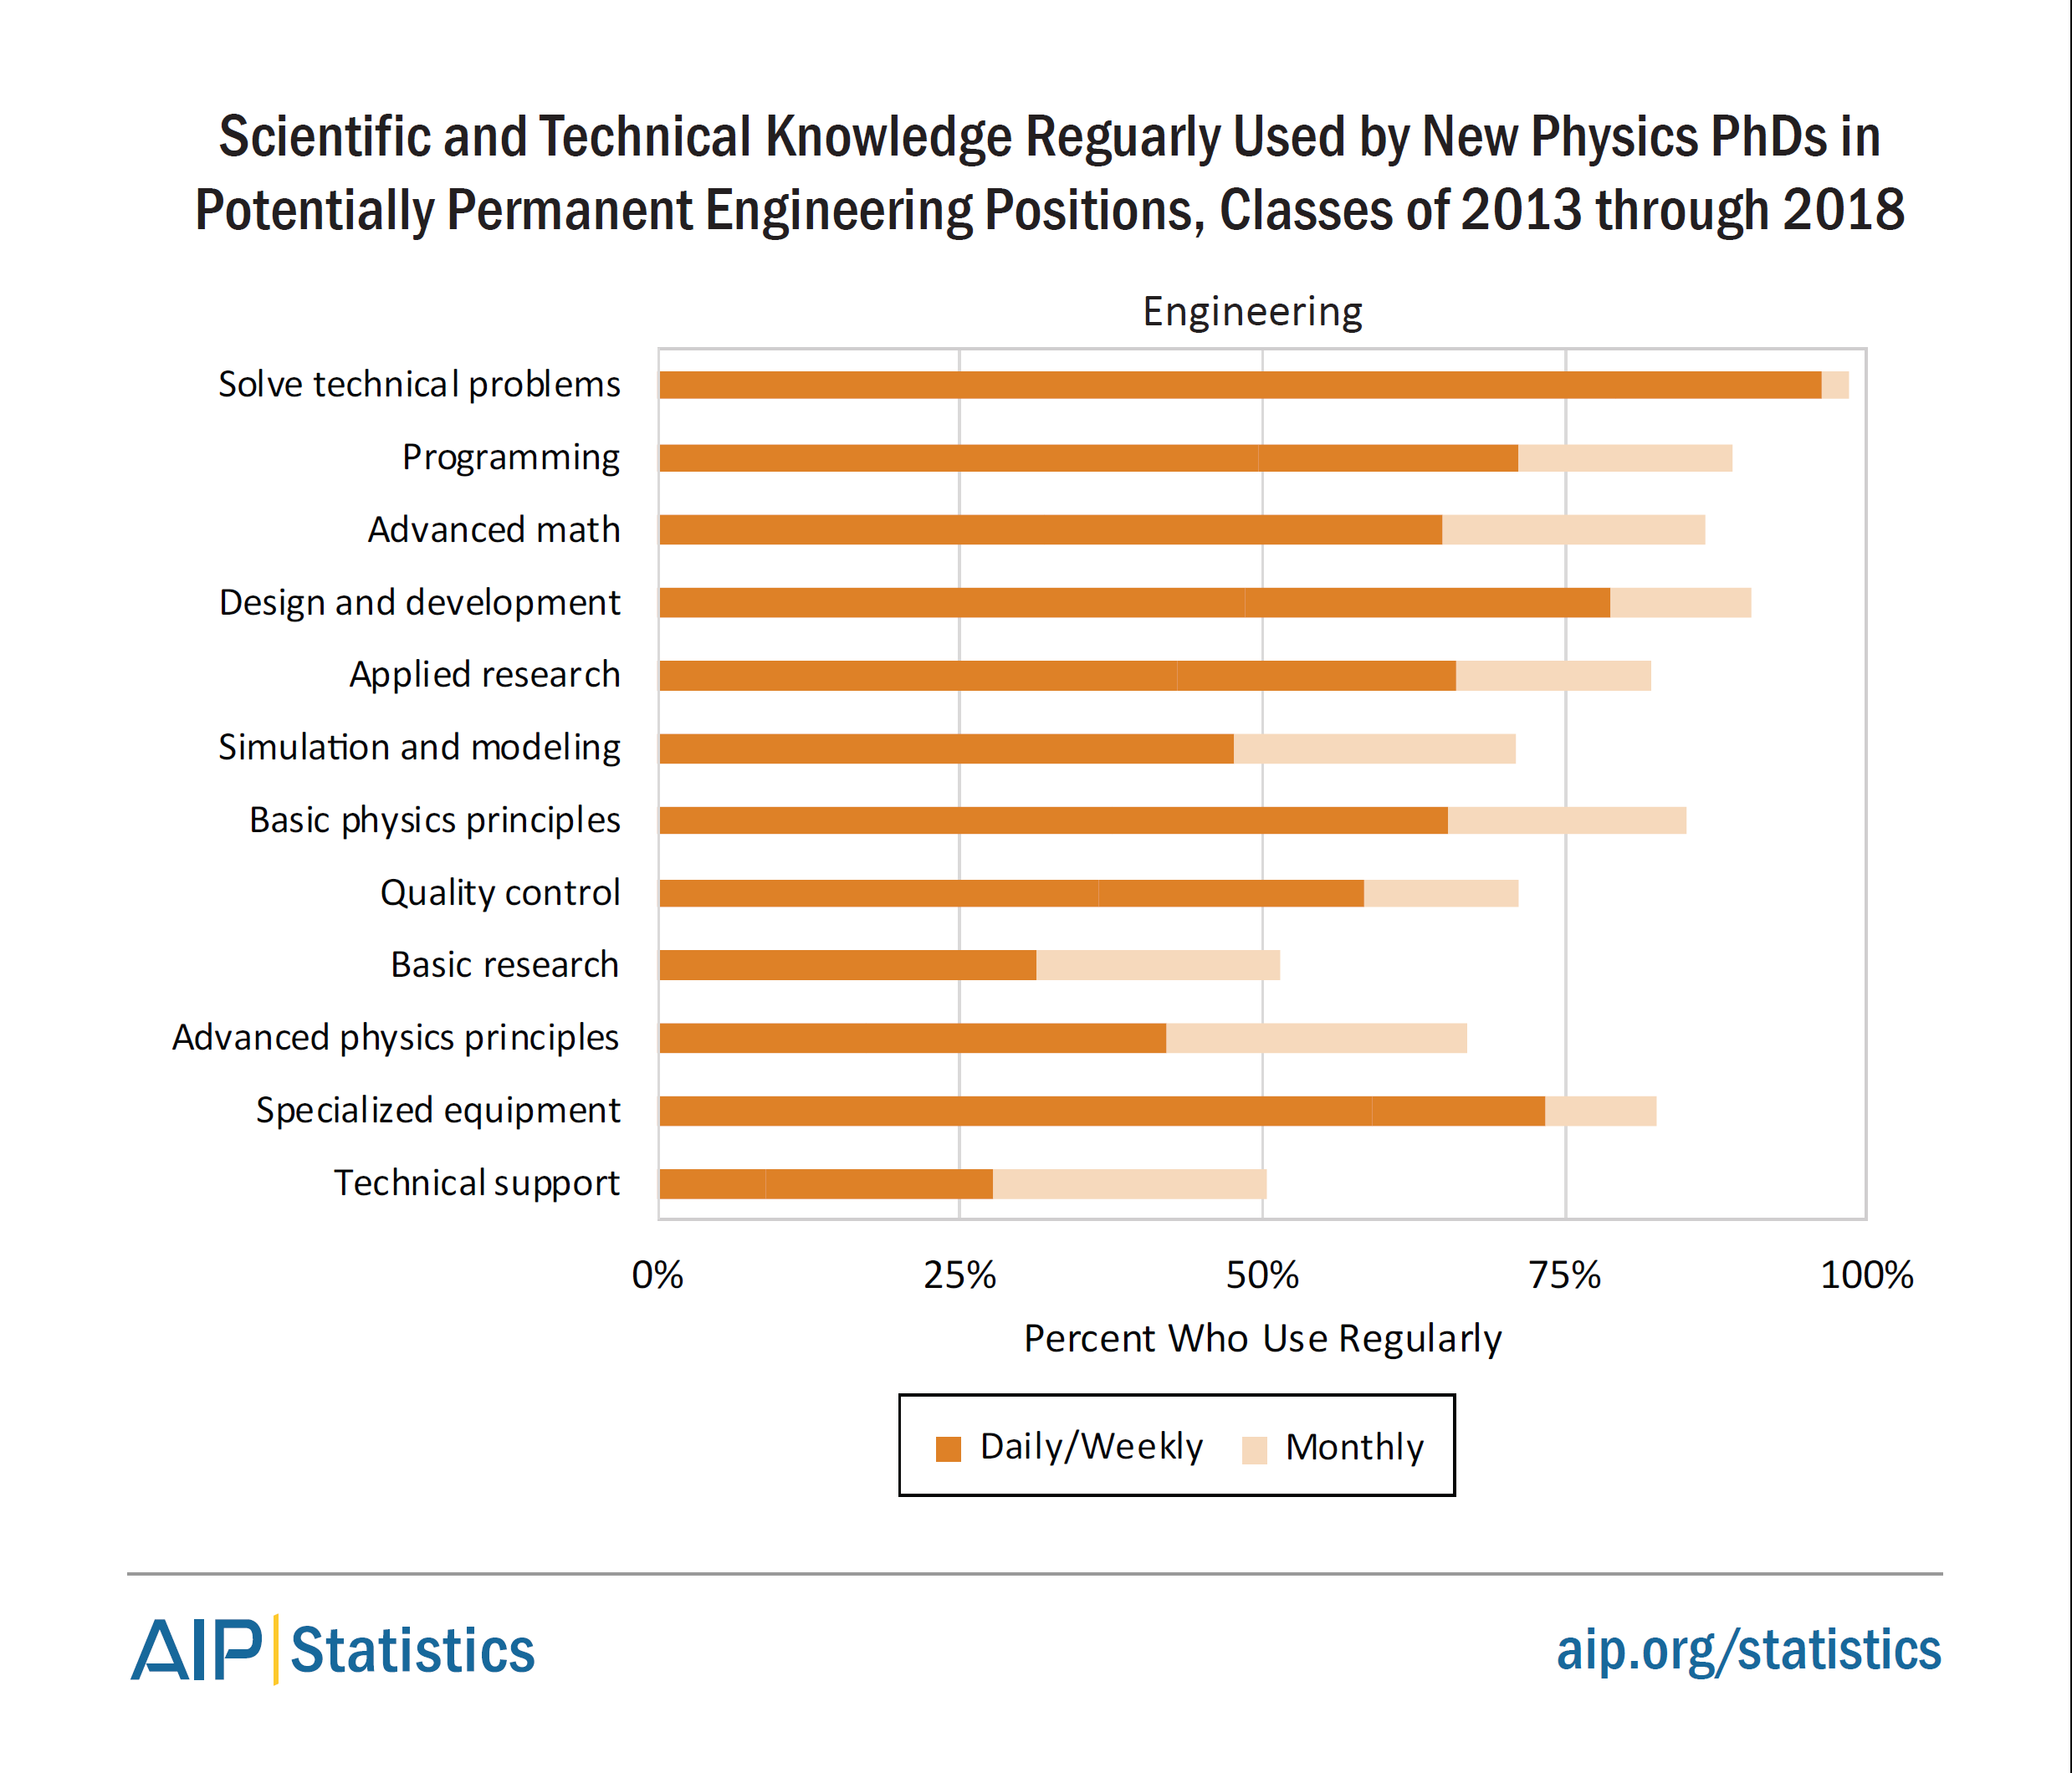 Scientific and Technical Knowledge Used by Physics PhDs in Engineering Positions